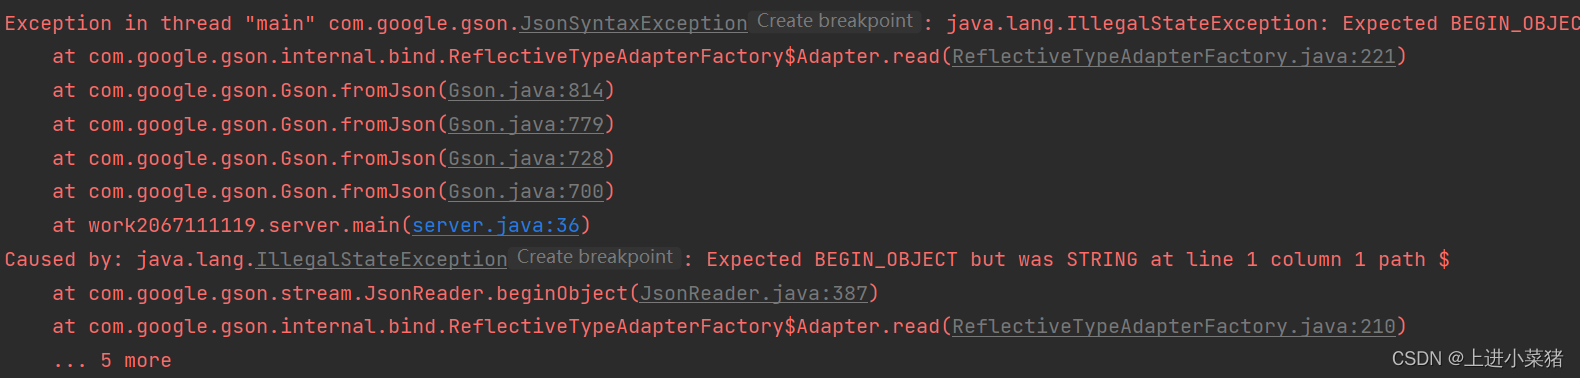 【bug解决】java.lang.IllegalStateException: Expected BEGIN_OBJECT but was STRING